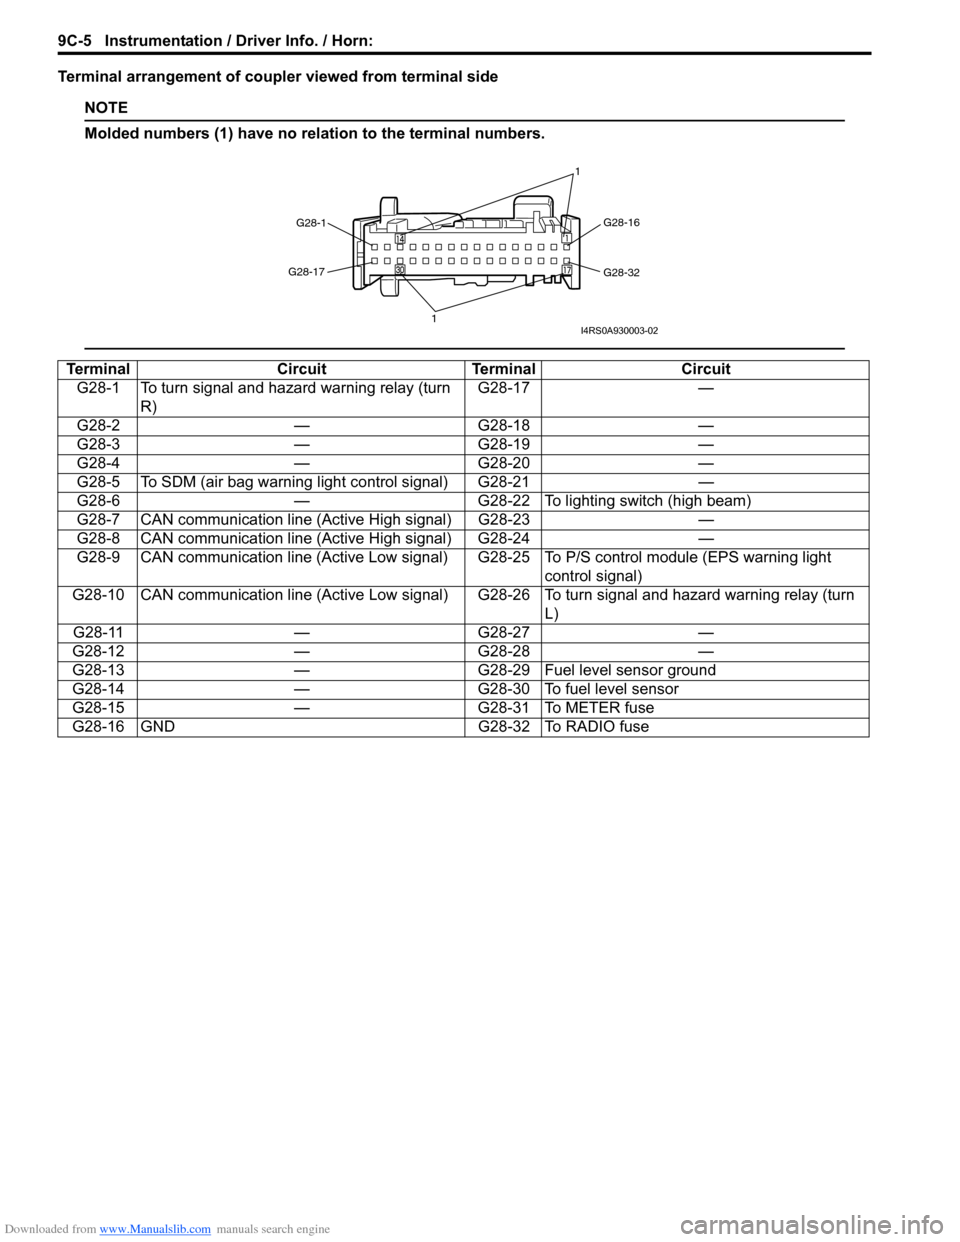 SUZUKI SWIFT 2005 2.G Service Workshop Manual Downloaded from www.Manualslib.com manuals search engine 9C-5 Instrumentation / Driver Info. / Horn: 
Terminal arrangement of coupler viewed from terminal side
NOTE
Molded numbers (1) have no relation